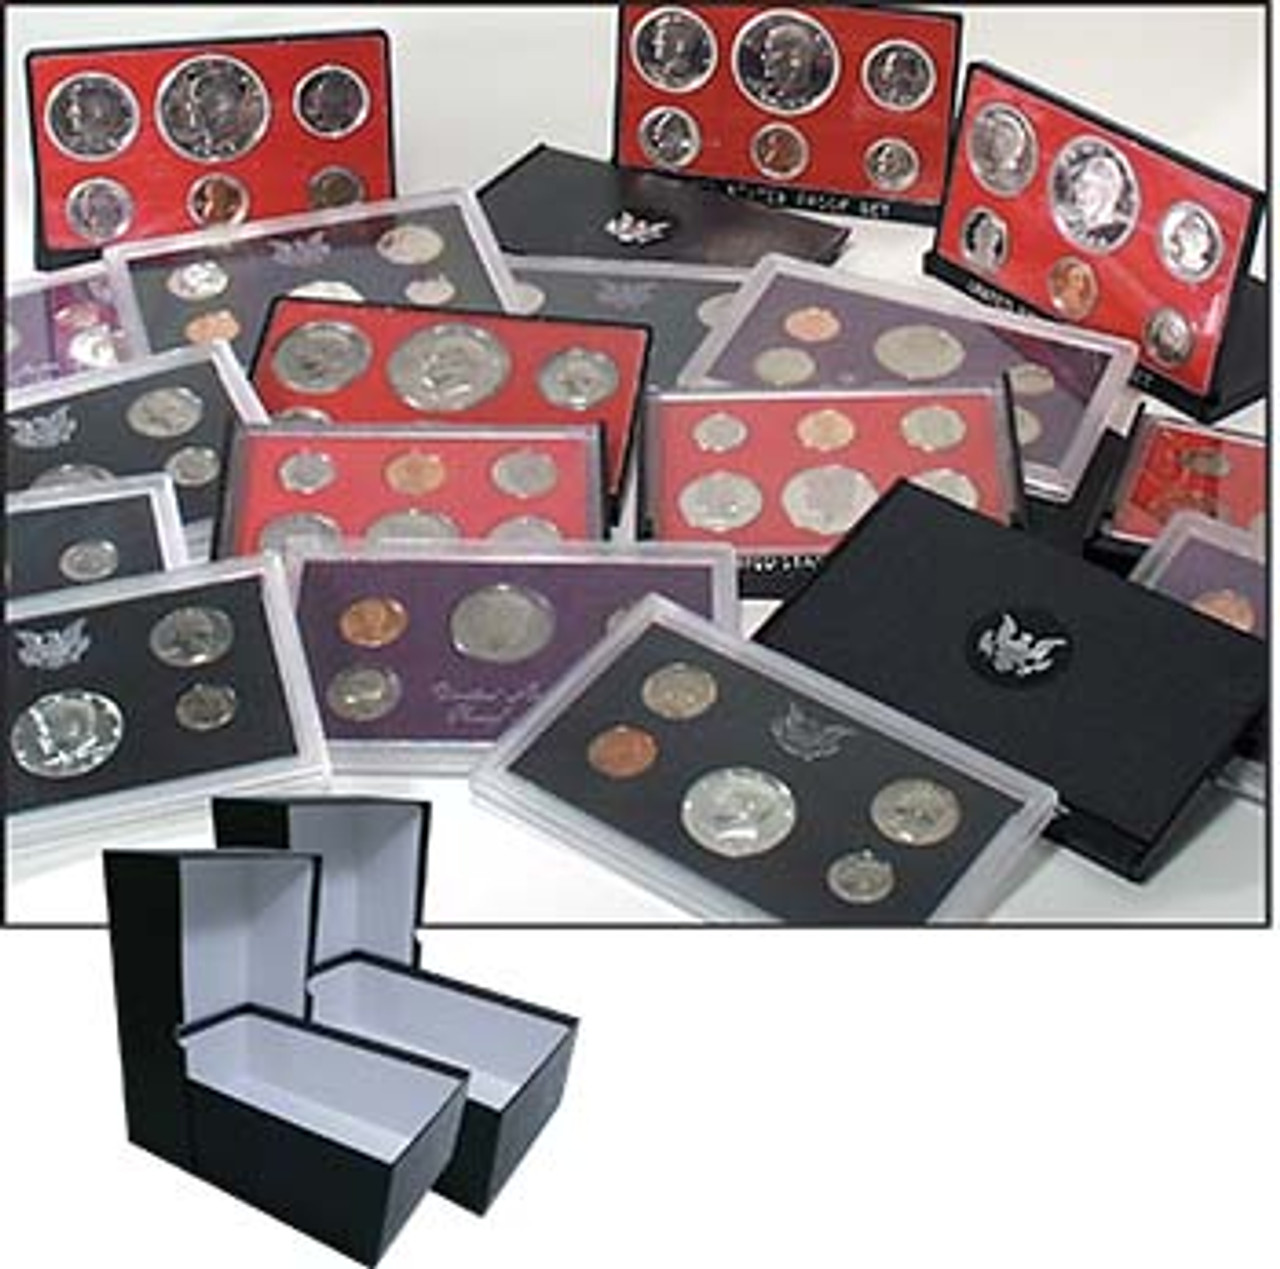 U.S. 1968-1998 First 31 San Francisco Mint Proof Sets with TWO FREE STORAGE BOXES